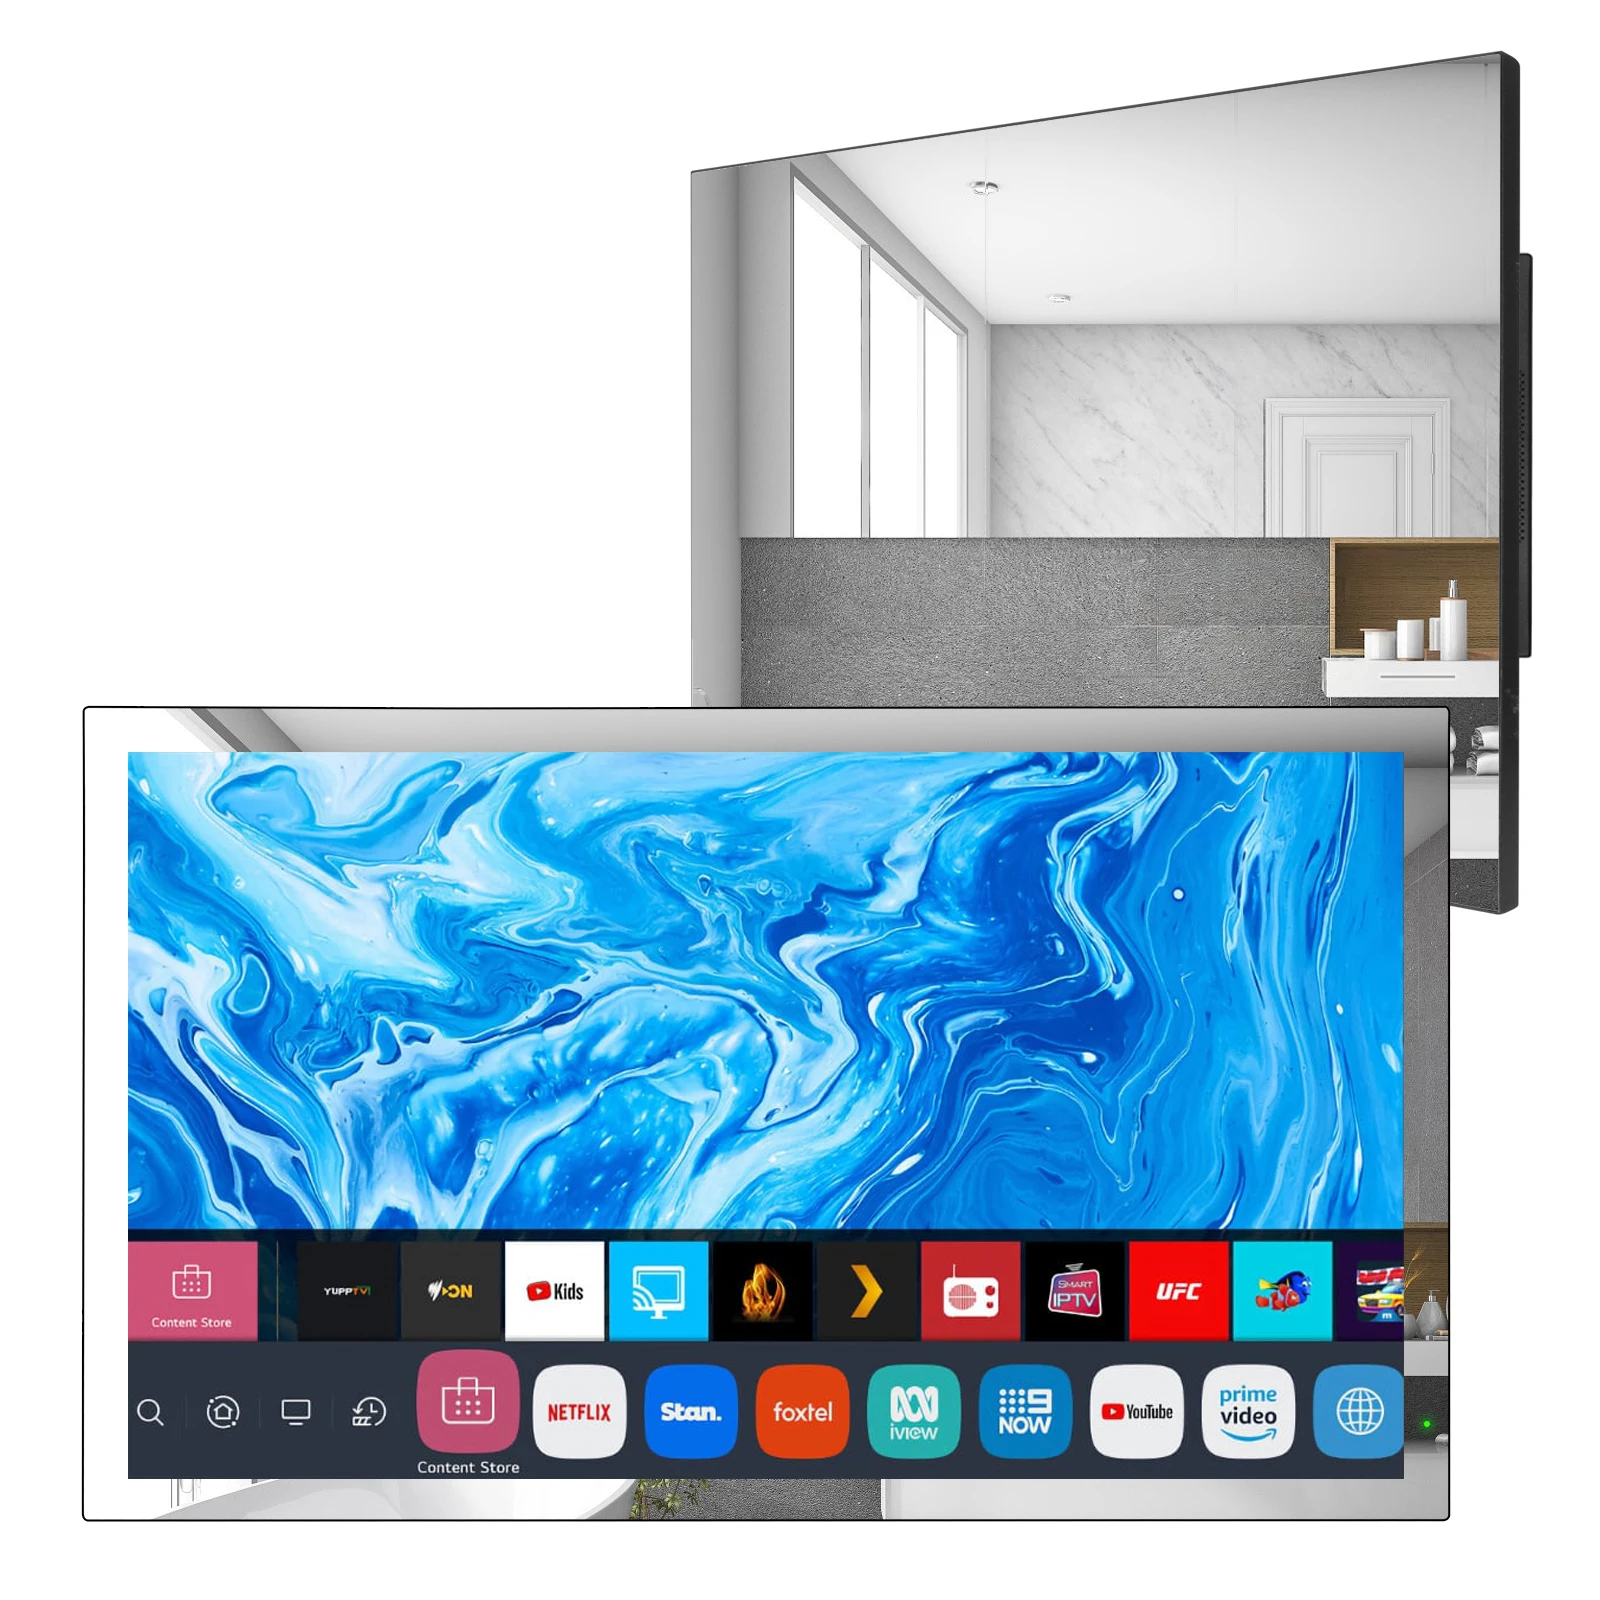 Soulaca 24 Inch Mirror TV for Bathroom webOS Dolby FHD Smart TV with Magic Remote, Voice Control, Built-in Speakers, Wi-Fi